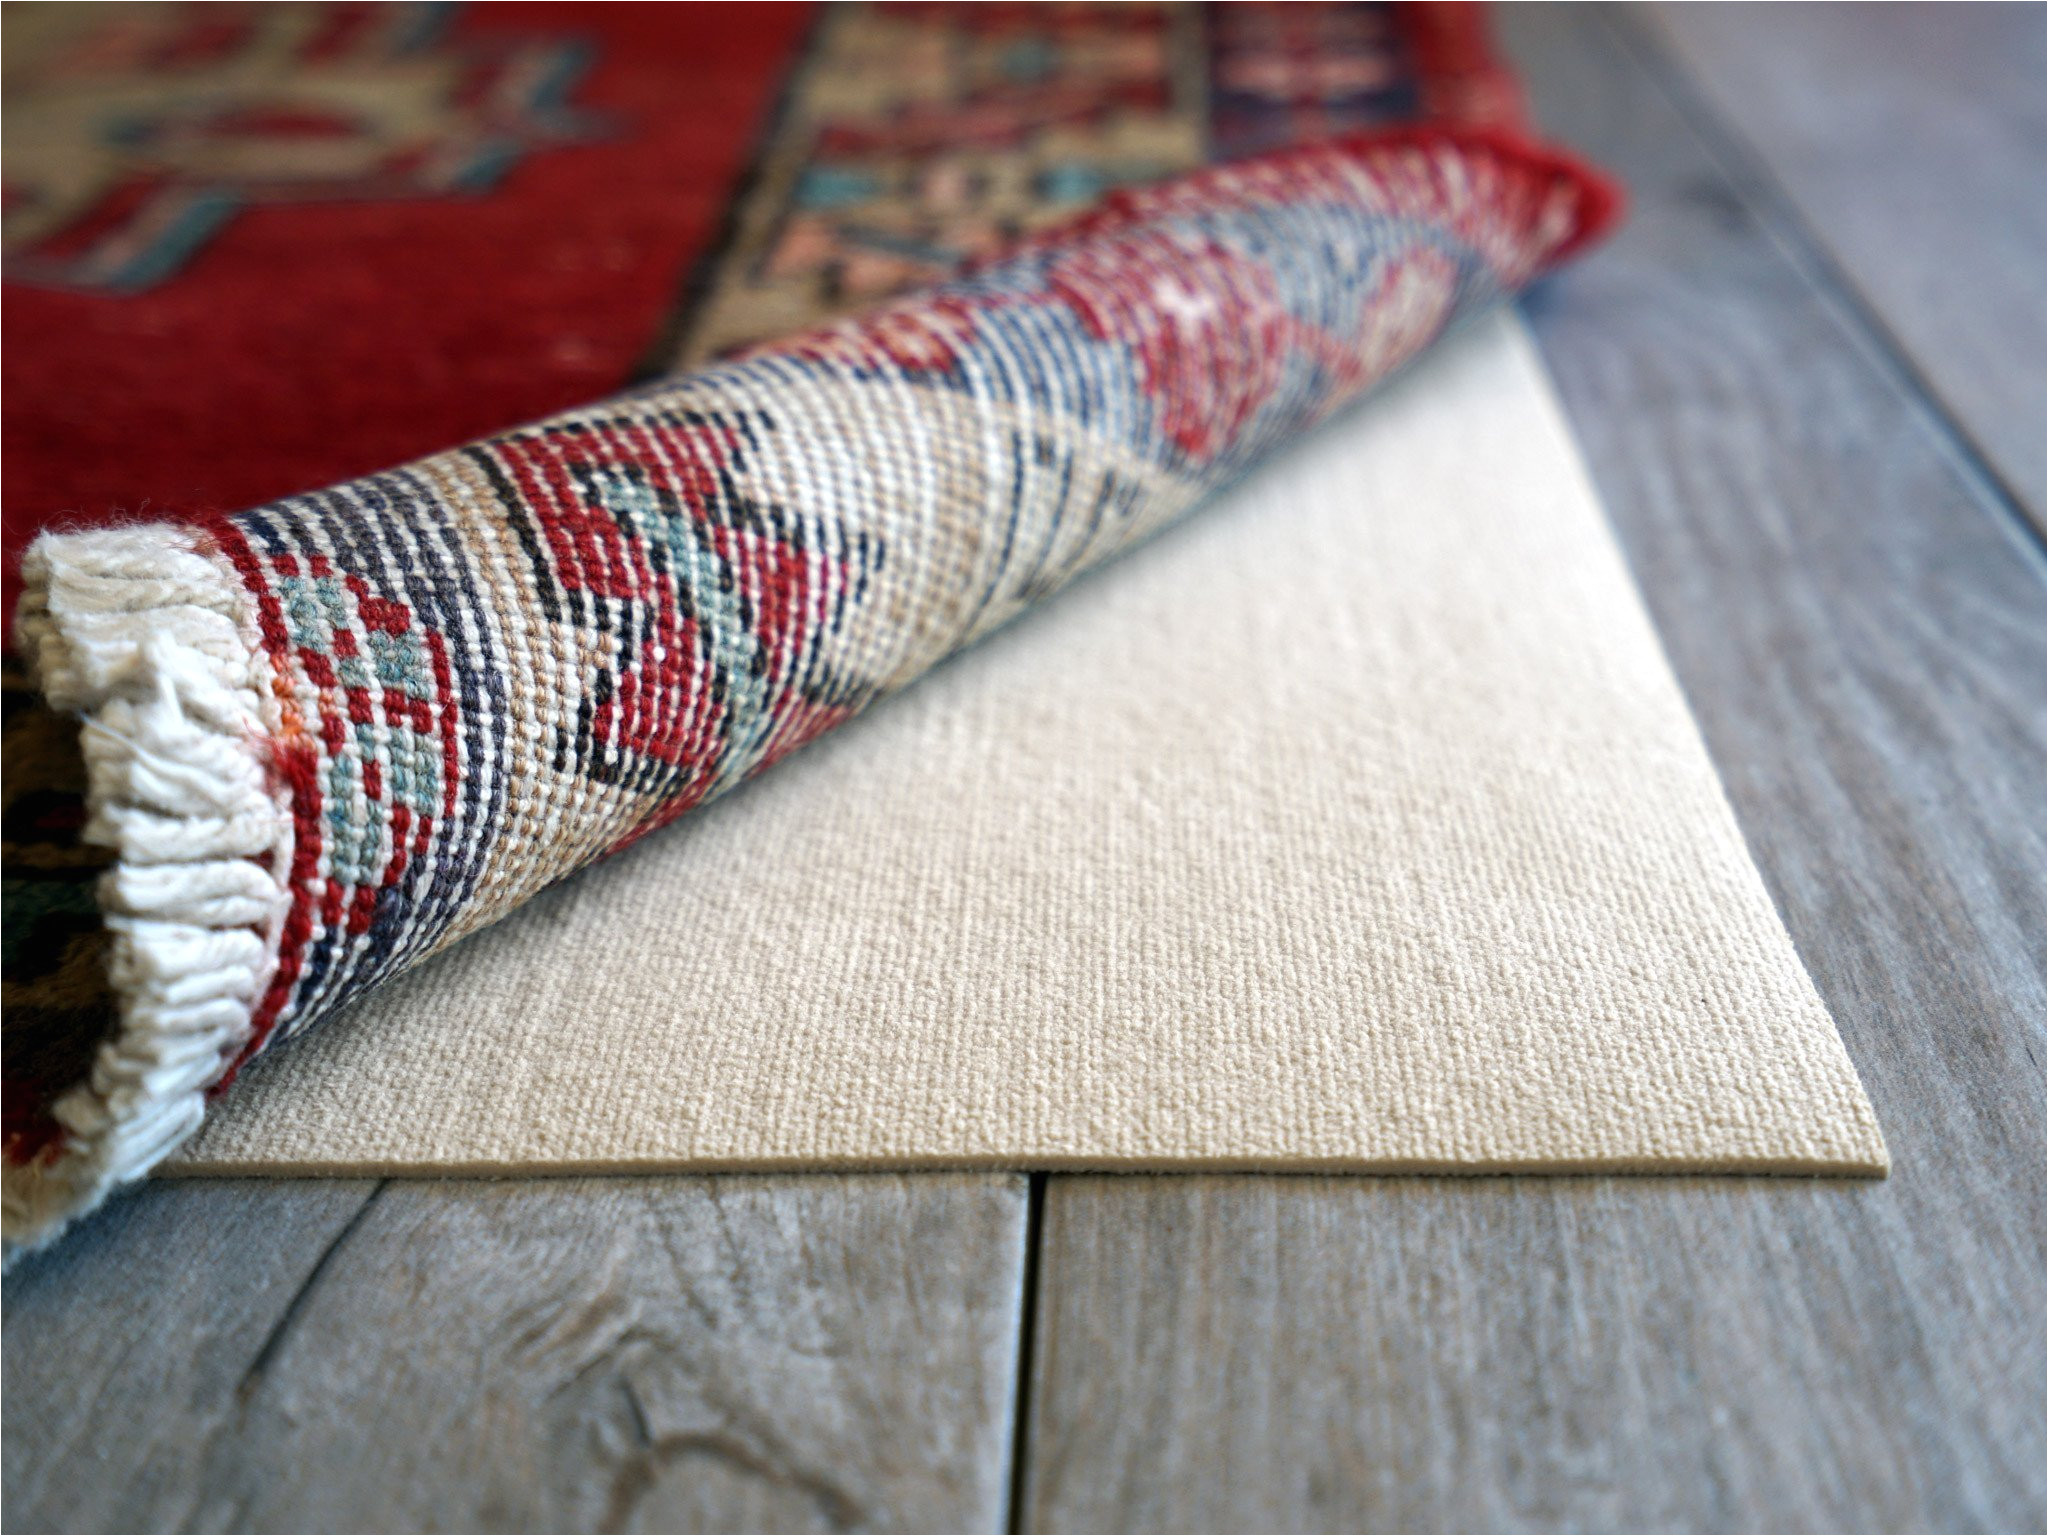 What is Purpose Of Rug Pad How to Protect Your Vinyl Floors From Damage Rugpadusa